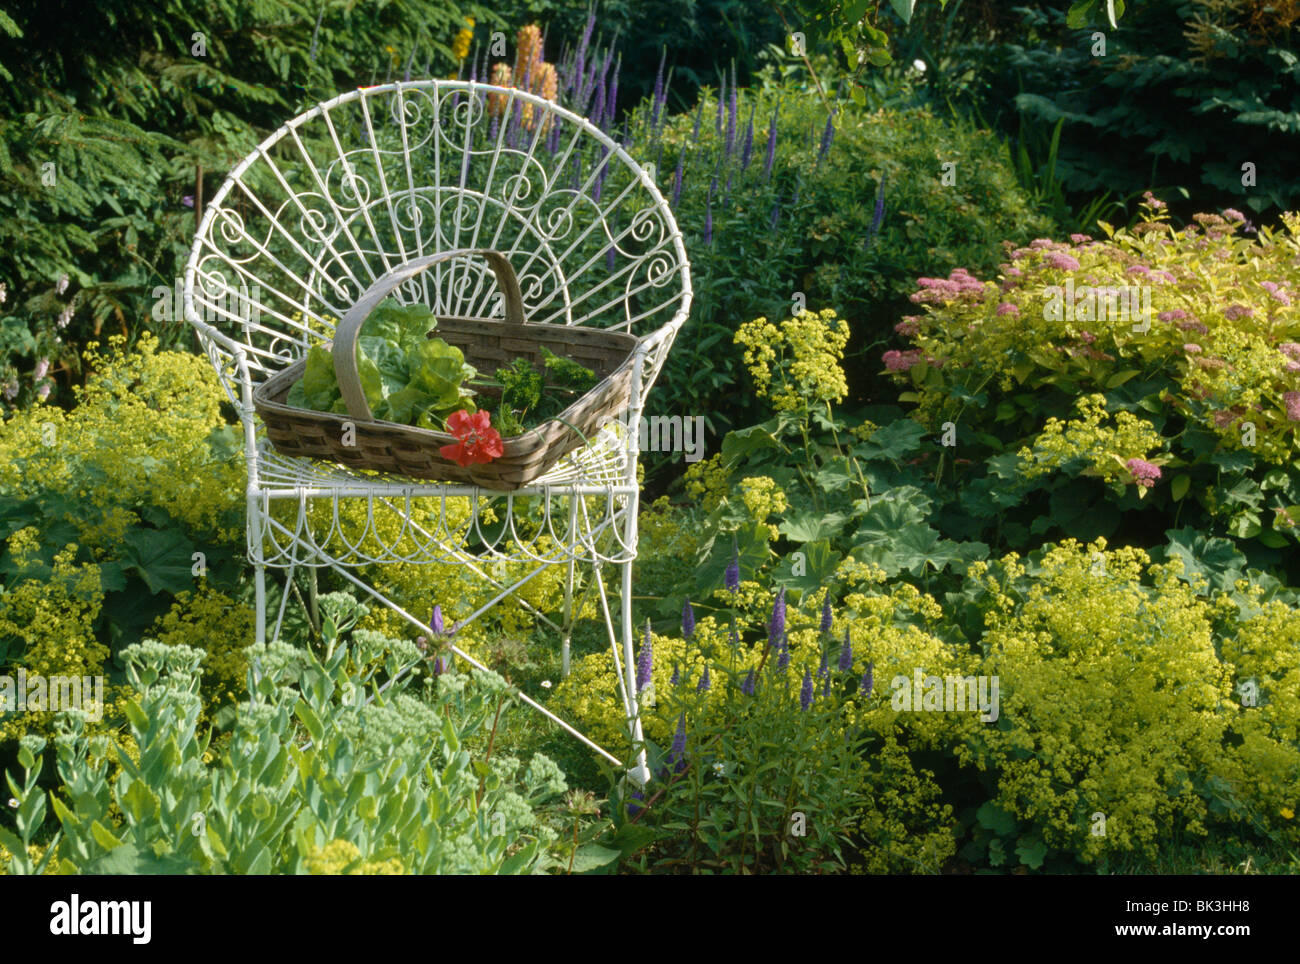 Wooden trug on white wire-work chair in summer border with alchemilla mollis and green sedum Stock Photo